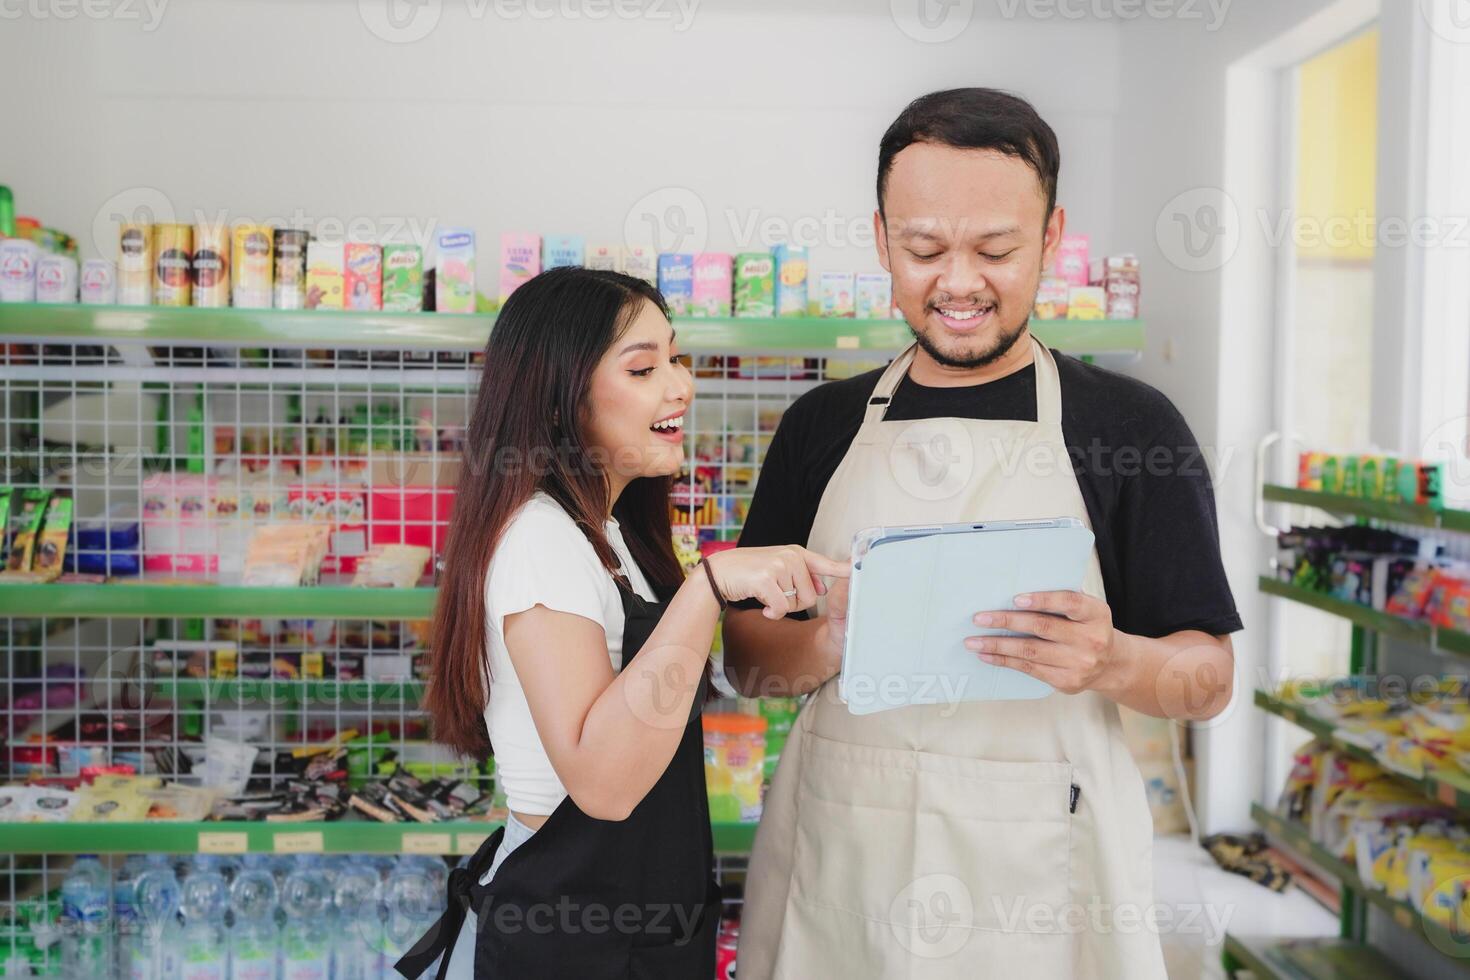 Smiling Asian people holding a tablet, cashier is wearing black and cream apron standing in a groceries or convenient store photo